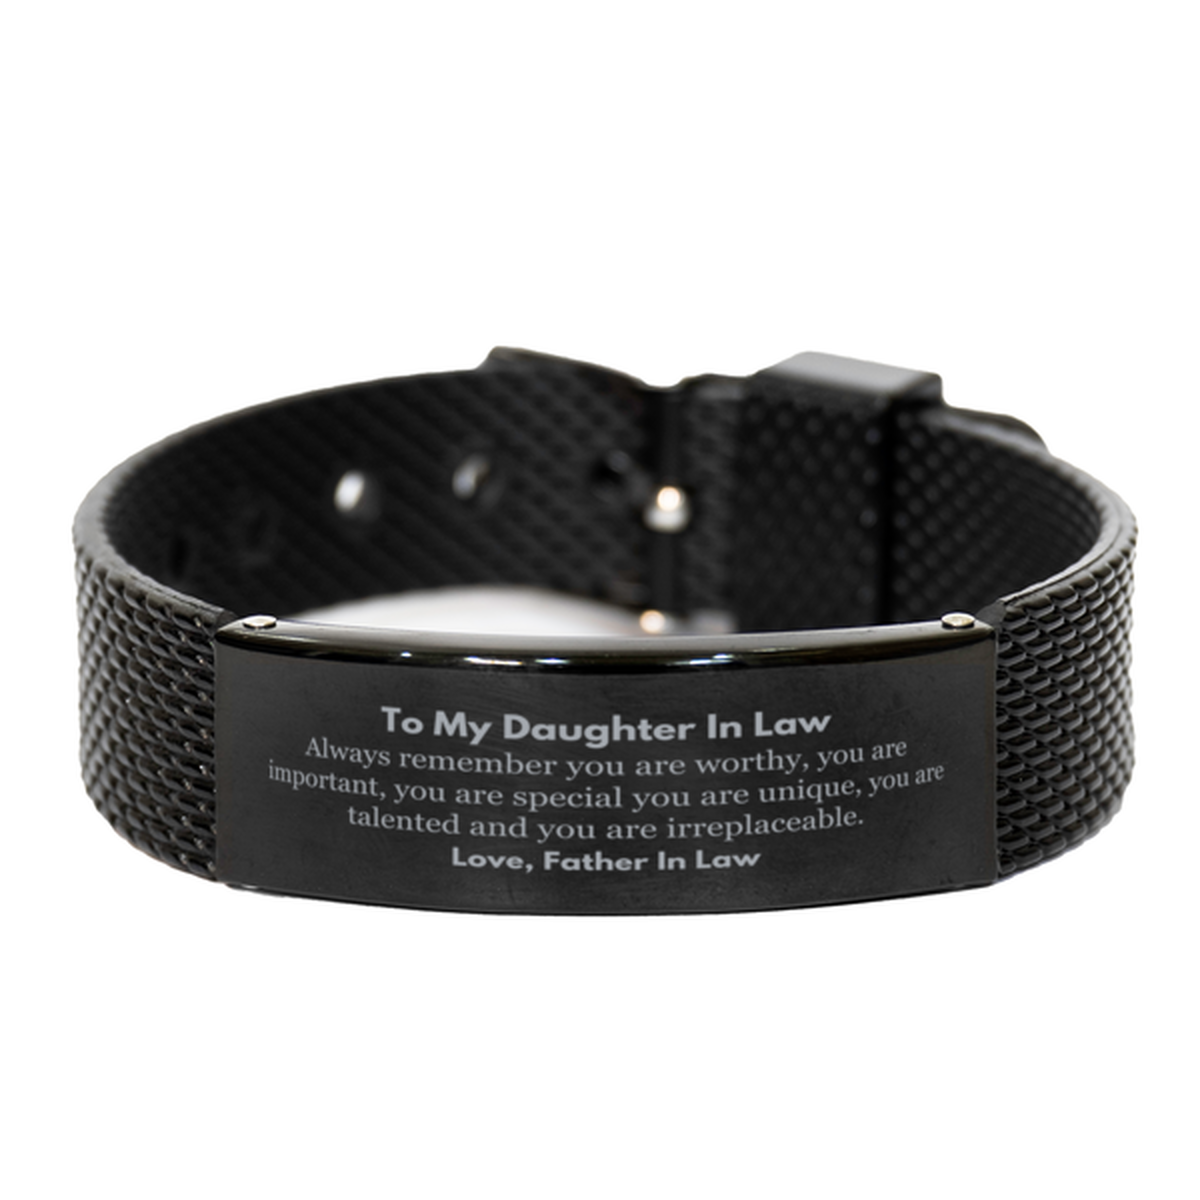 Daughter In Law Birthday Gifts from Father In Law, Inspirational Black Shark Mesh Bracelet for Daughter In Law Christmas Graduation Gifts for Daughter In Law Always remember you are worthy, you are important. Love, Father In Law